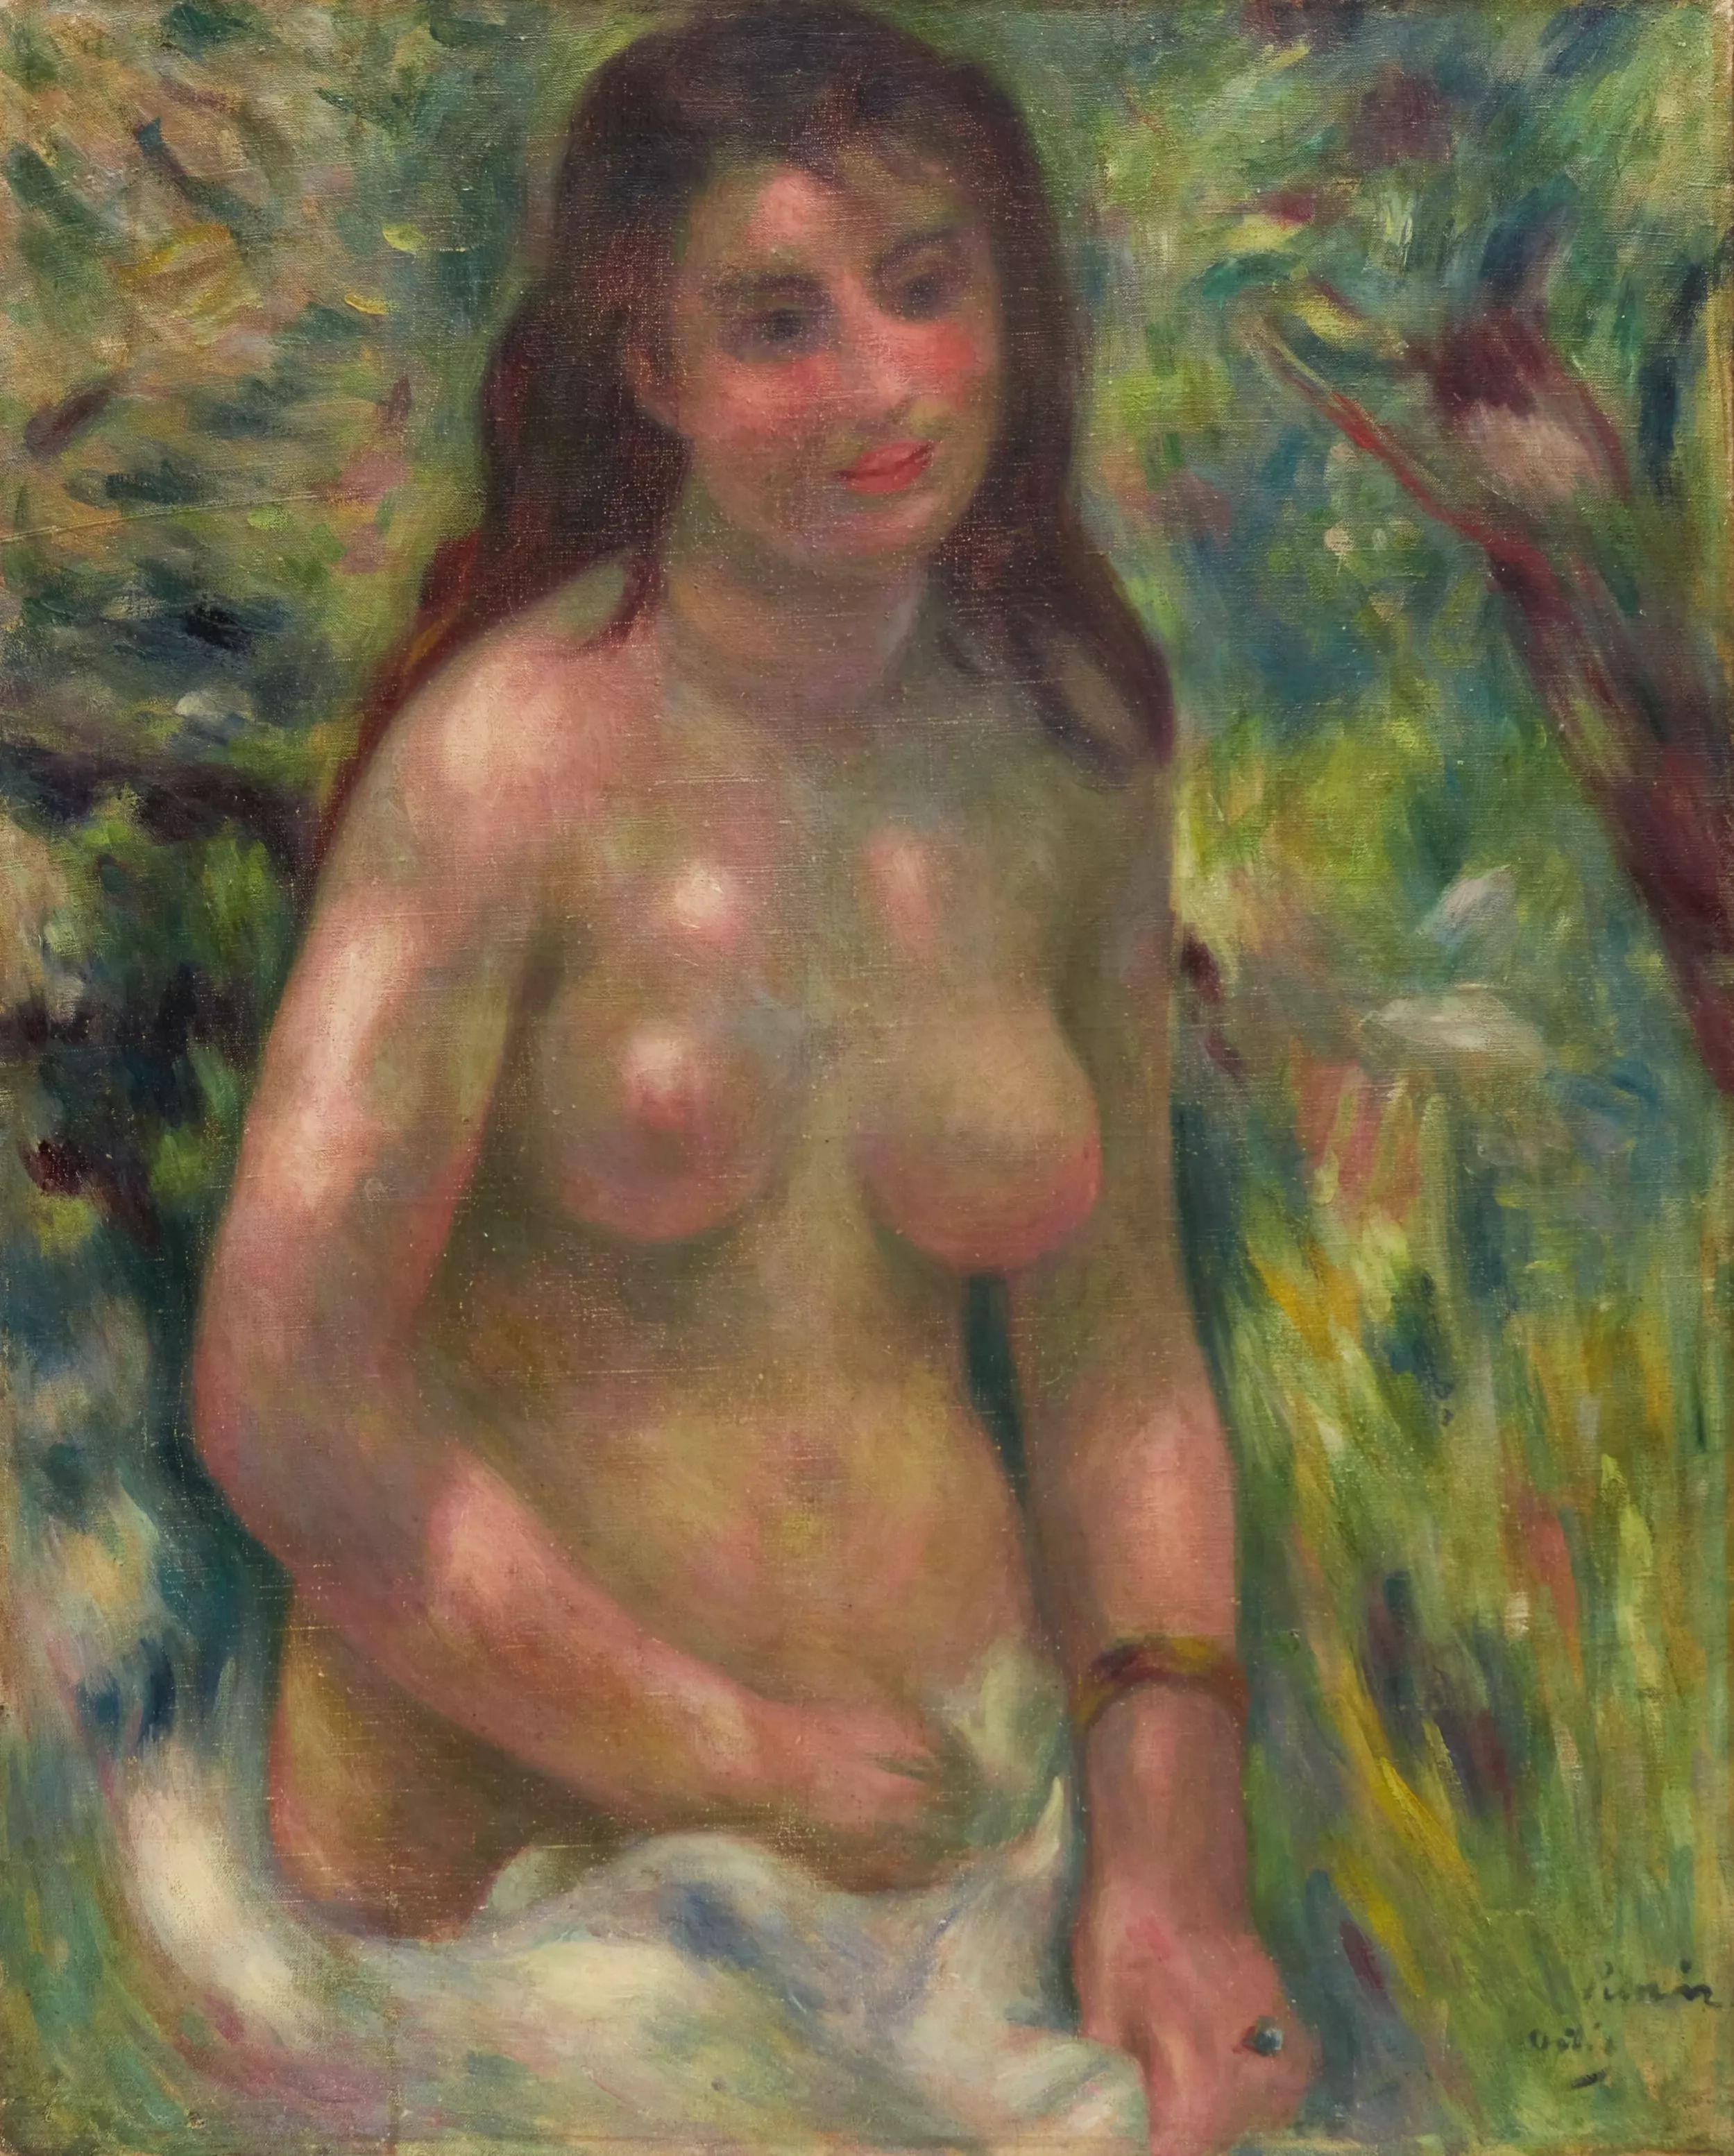 Bather in sunny shade, in the manner of Pierre-Auguste Renoir (1841-1919). - Image 2 of 6